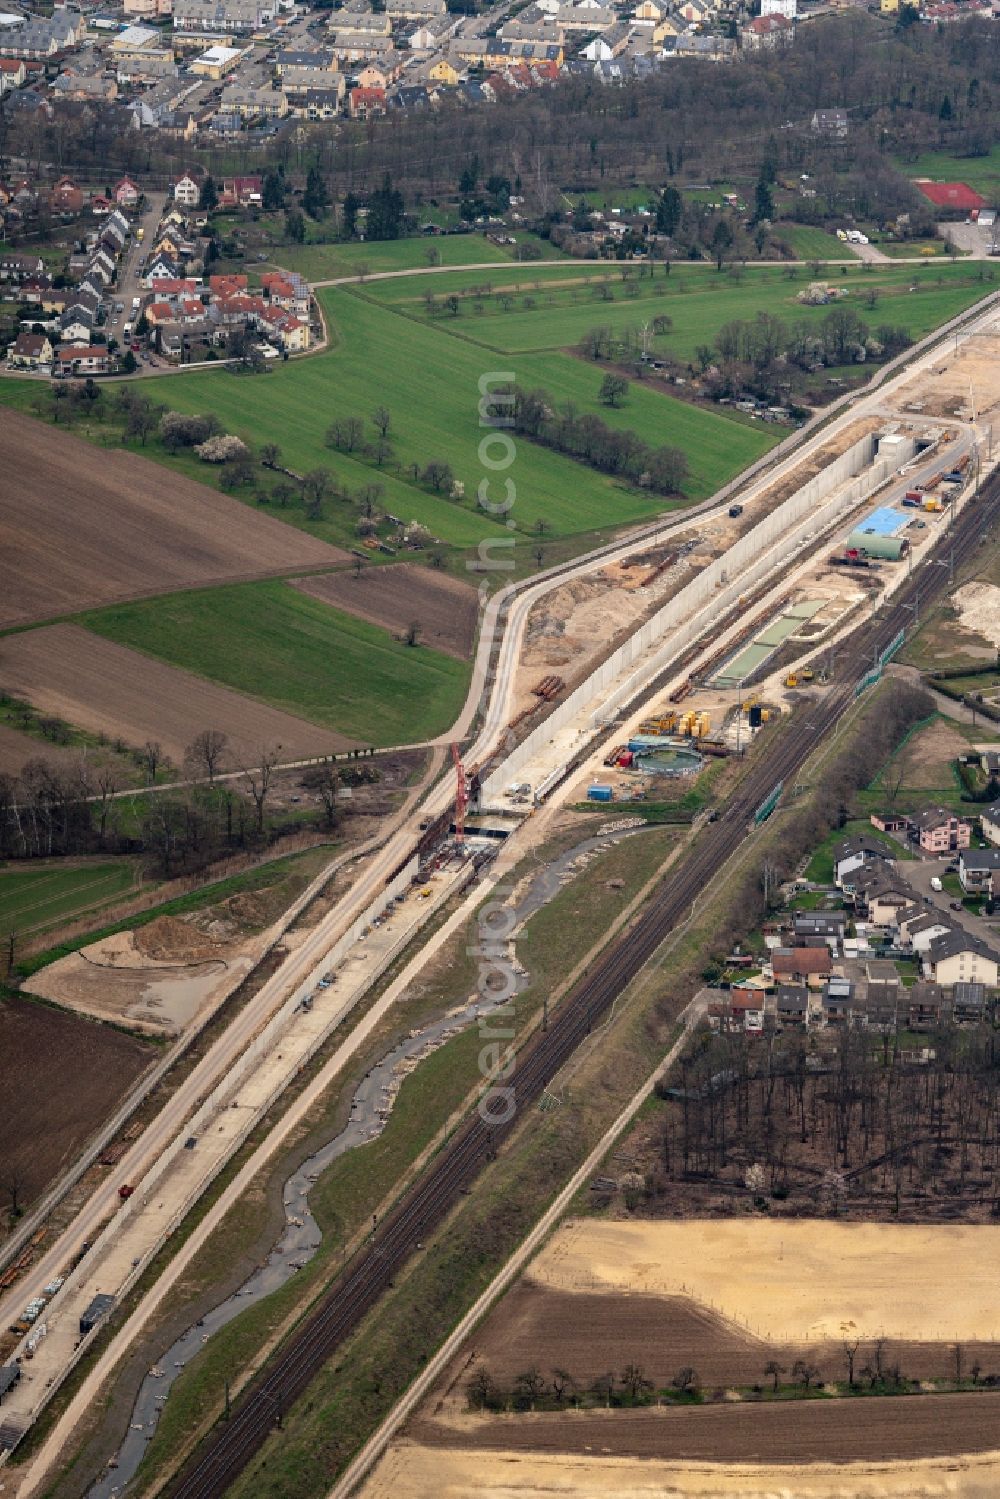 Aerial photograph Rastatt - Construtcion work on a rail tunnel track in the route network of the Deutsche Bahn in Rastatt in the state Baden-Wurttemberg, Germany